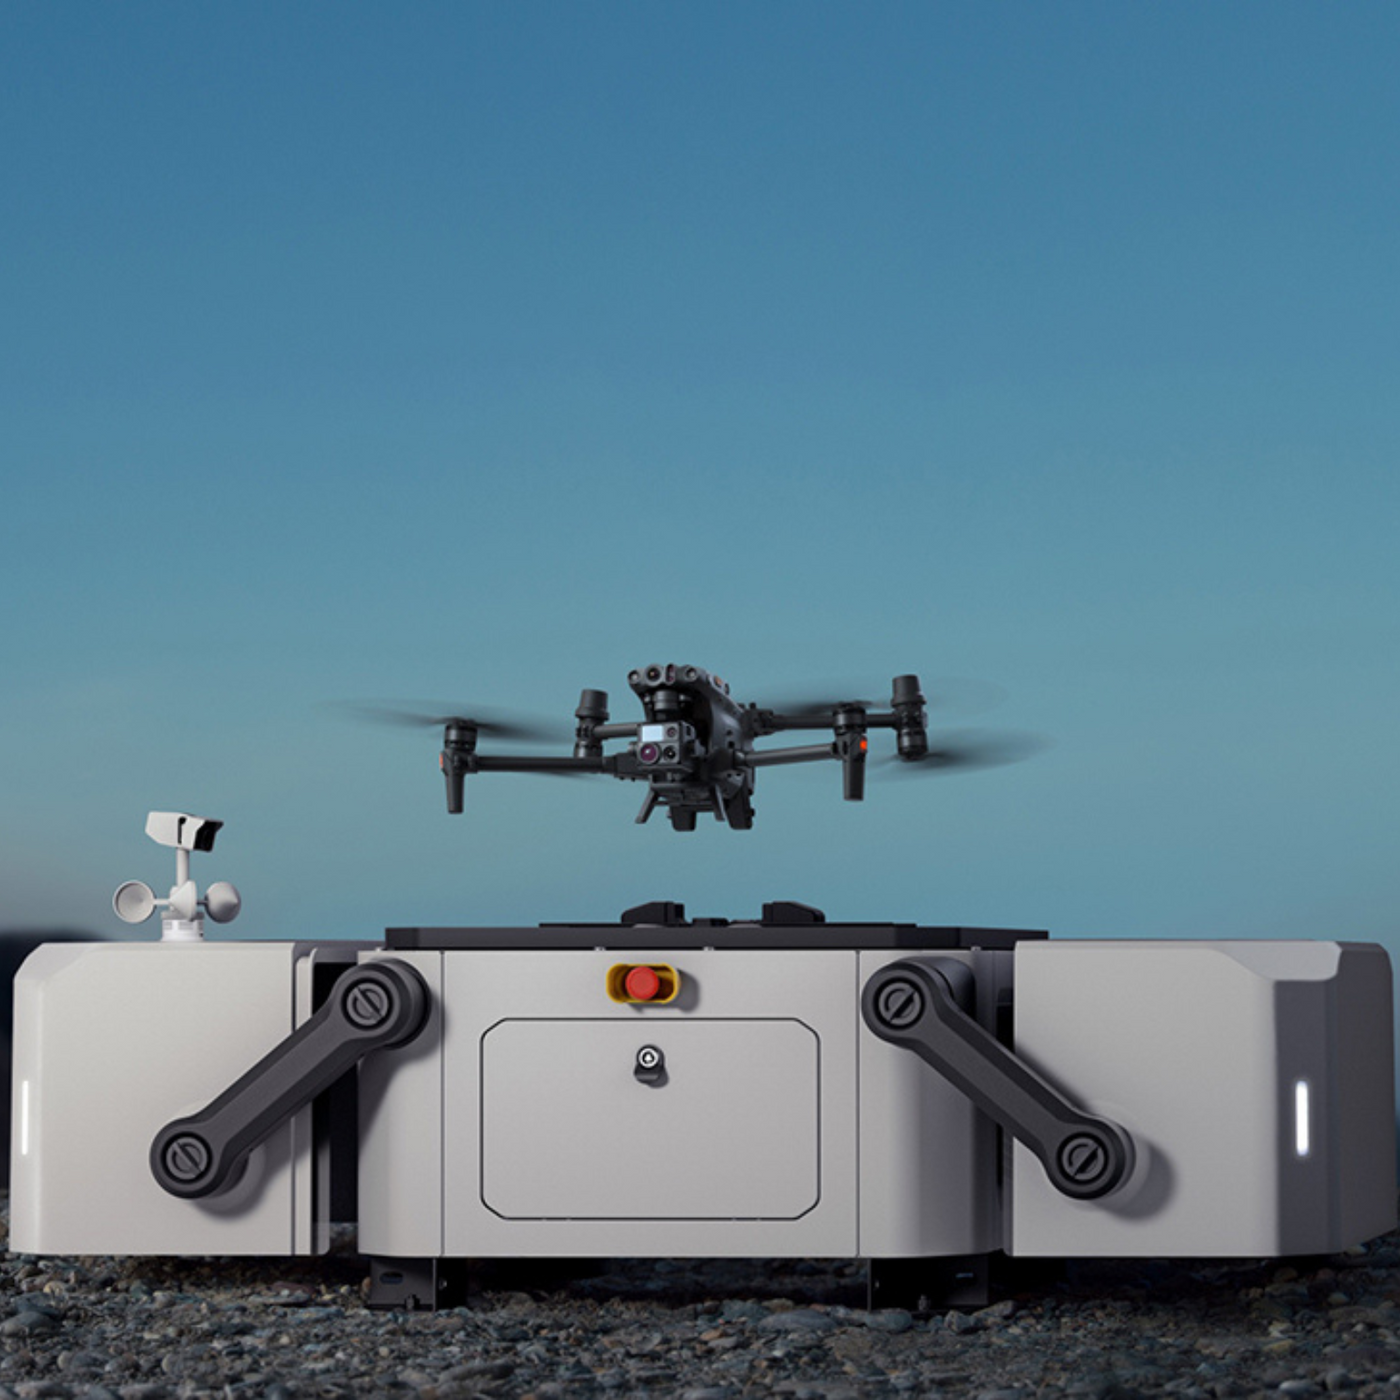 2023 predictions for DJI and the drone industry